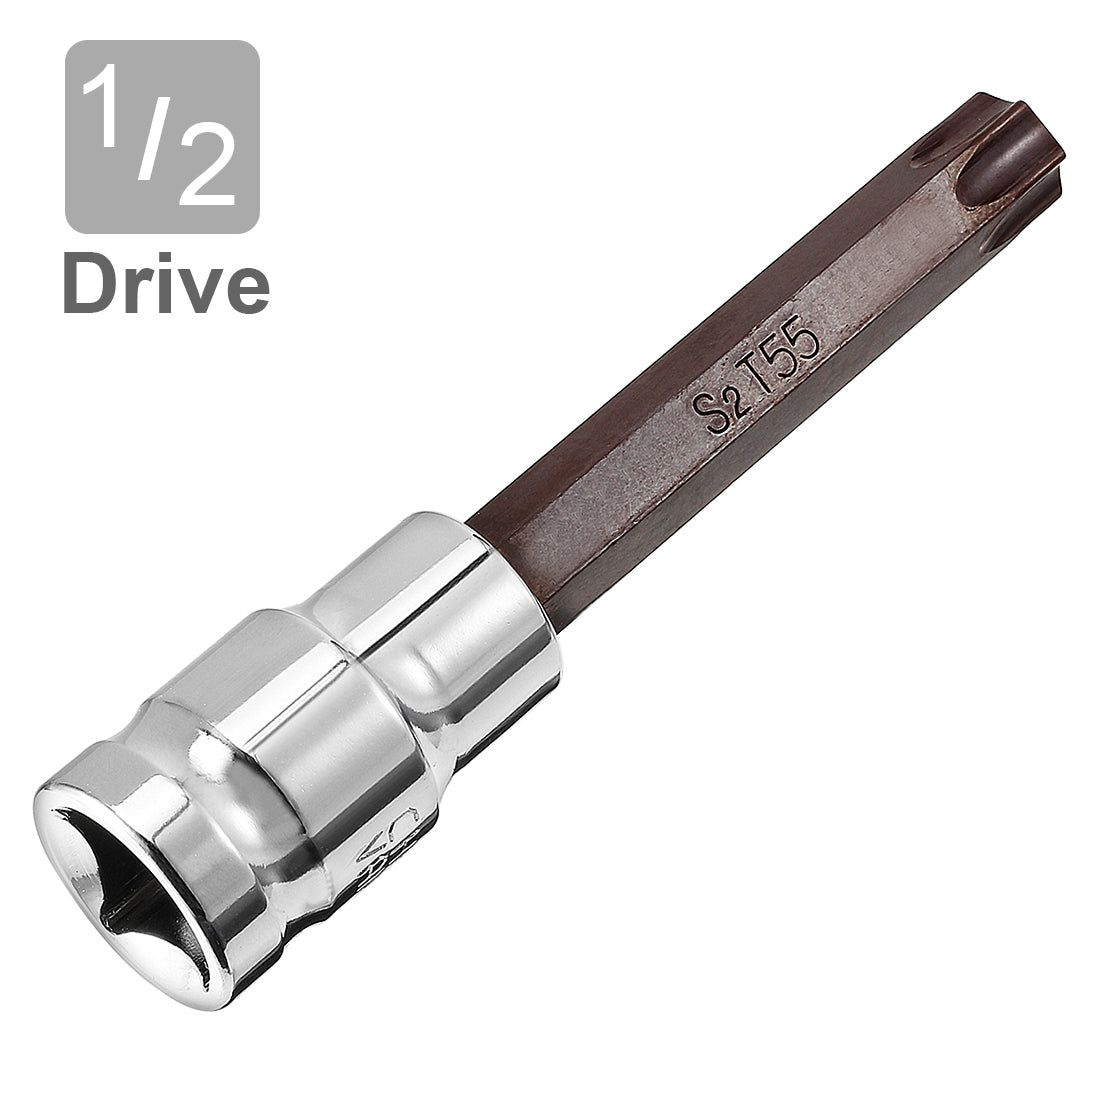 uxcell Uxcell 1/2-Inch Drive T55 Torx Bit Extra Long Socket, S2 Steel